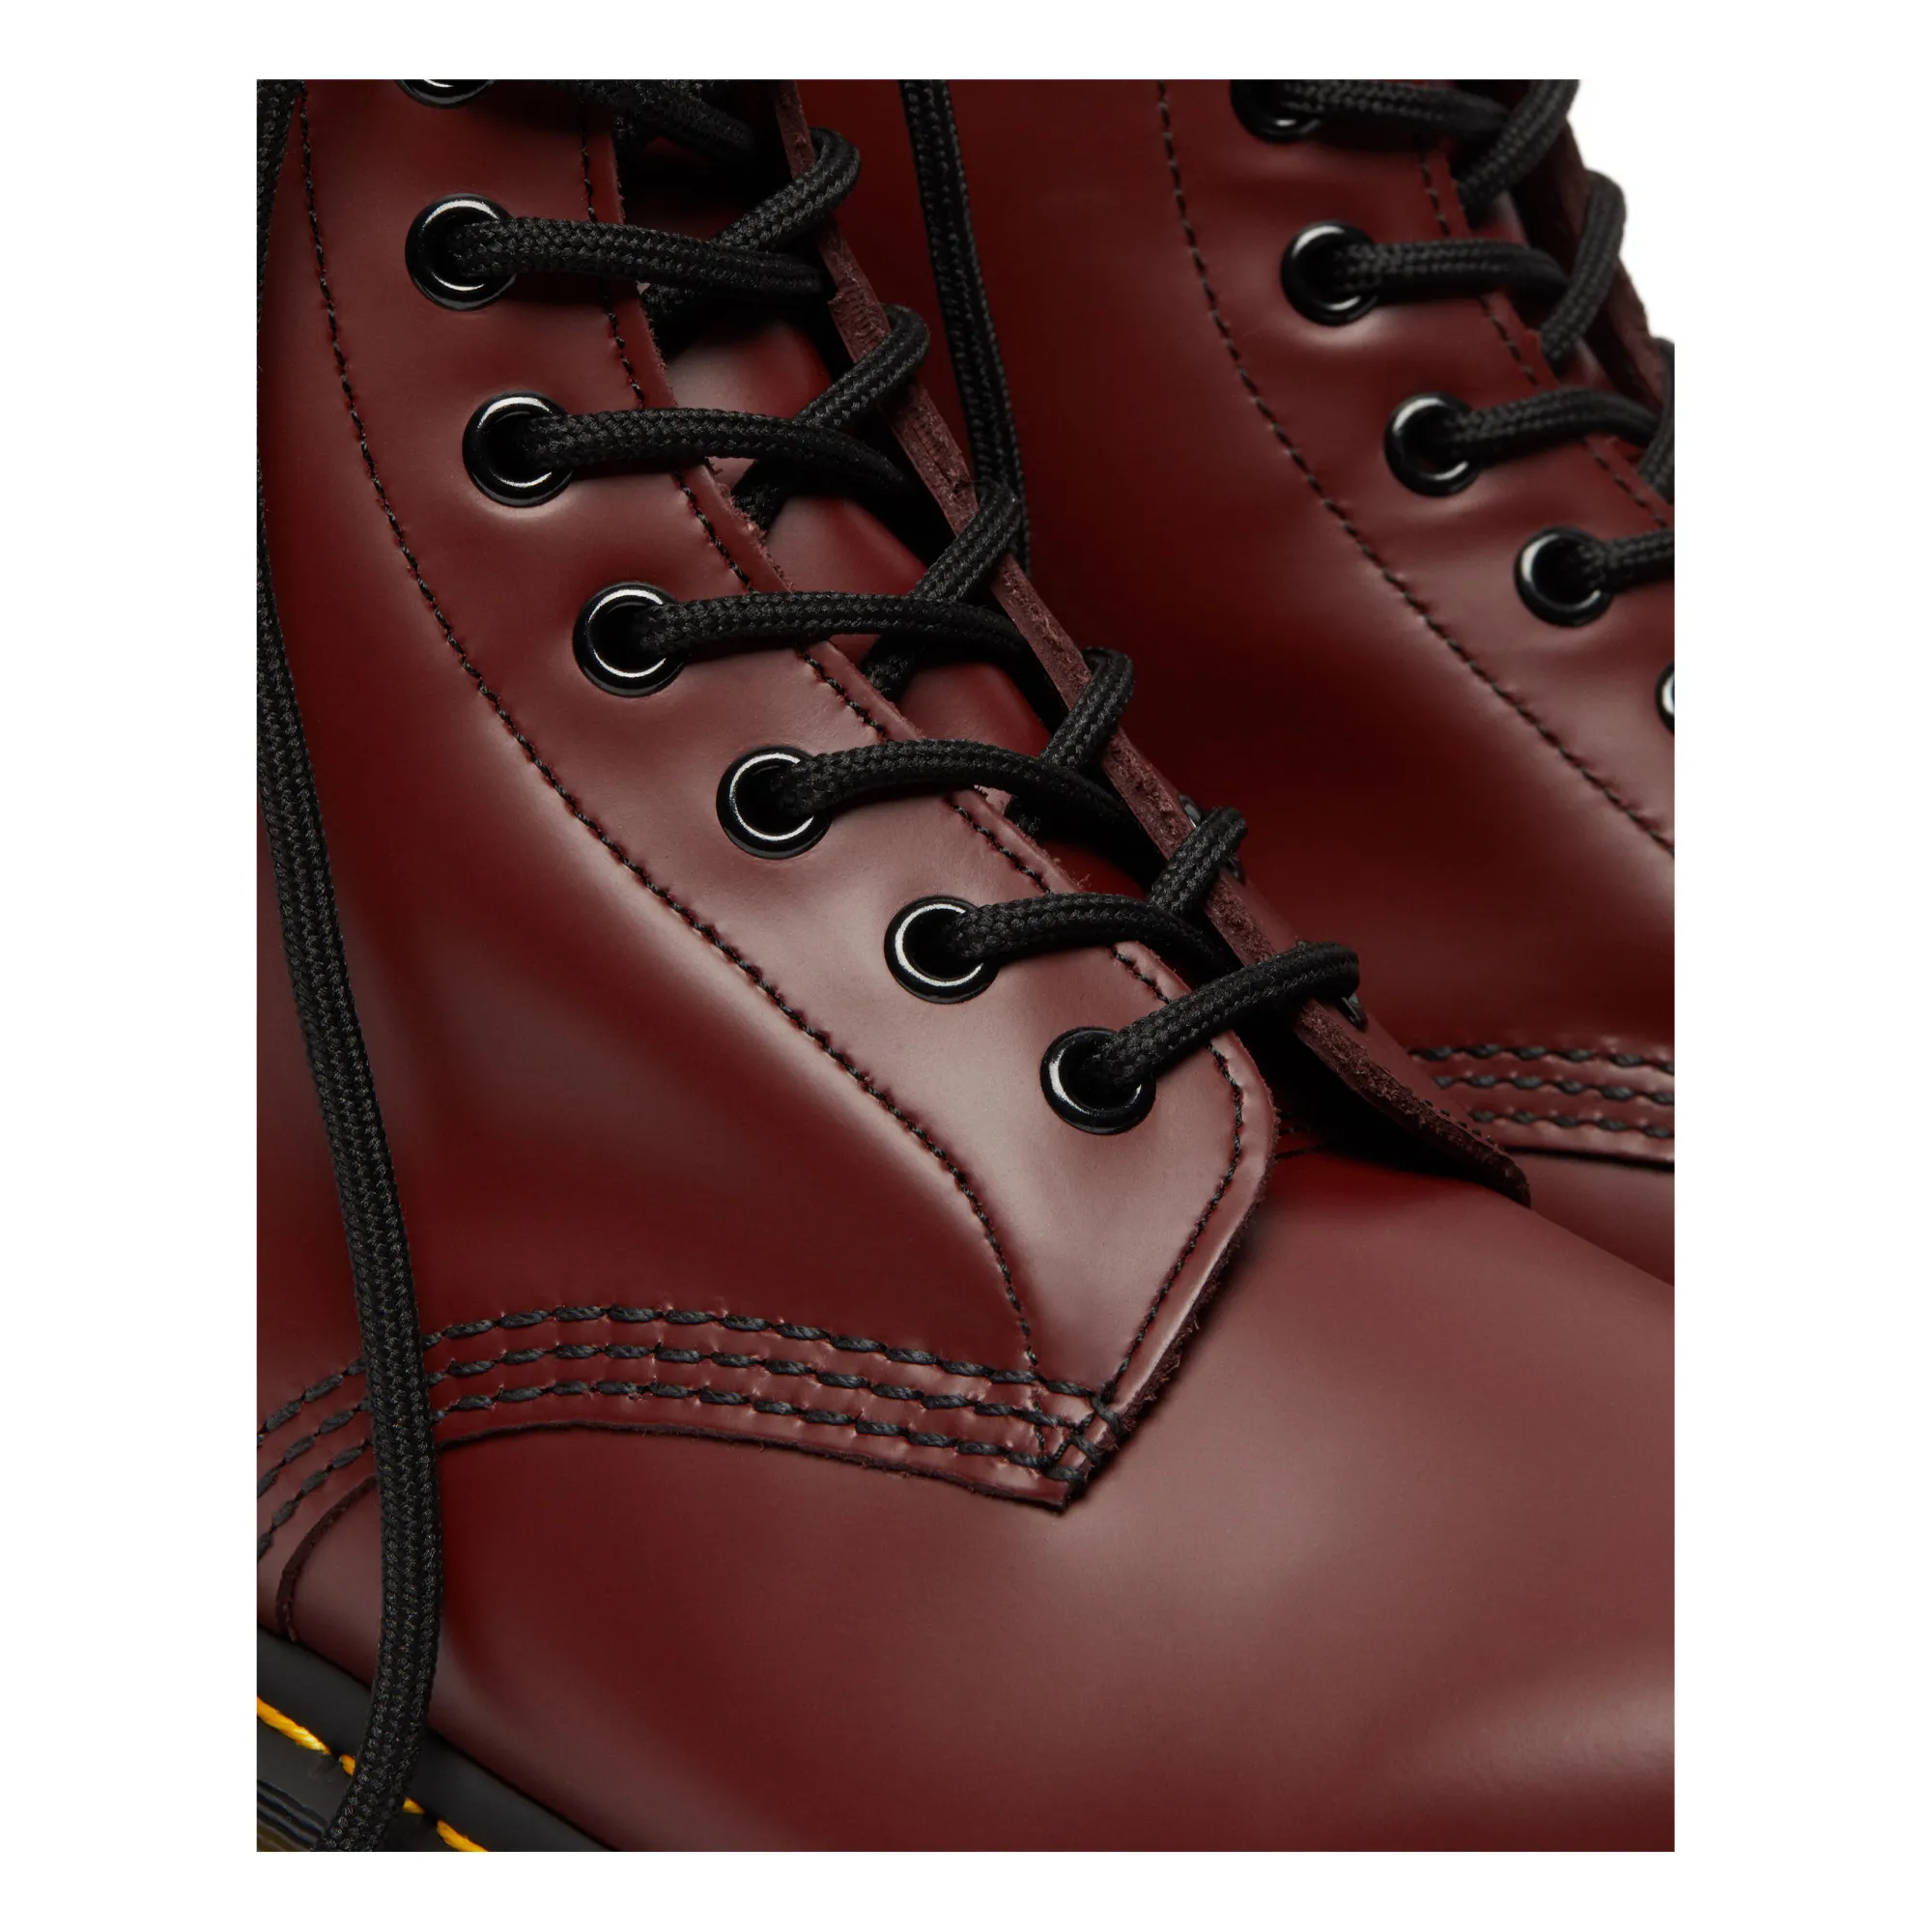 Dr Martens - 1460 Smooth Leather Lace-Up Boots - Women's